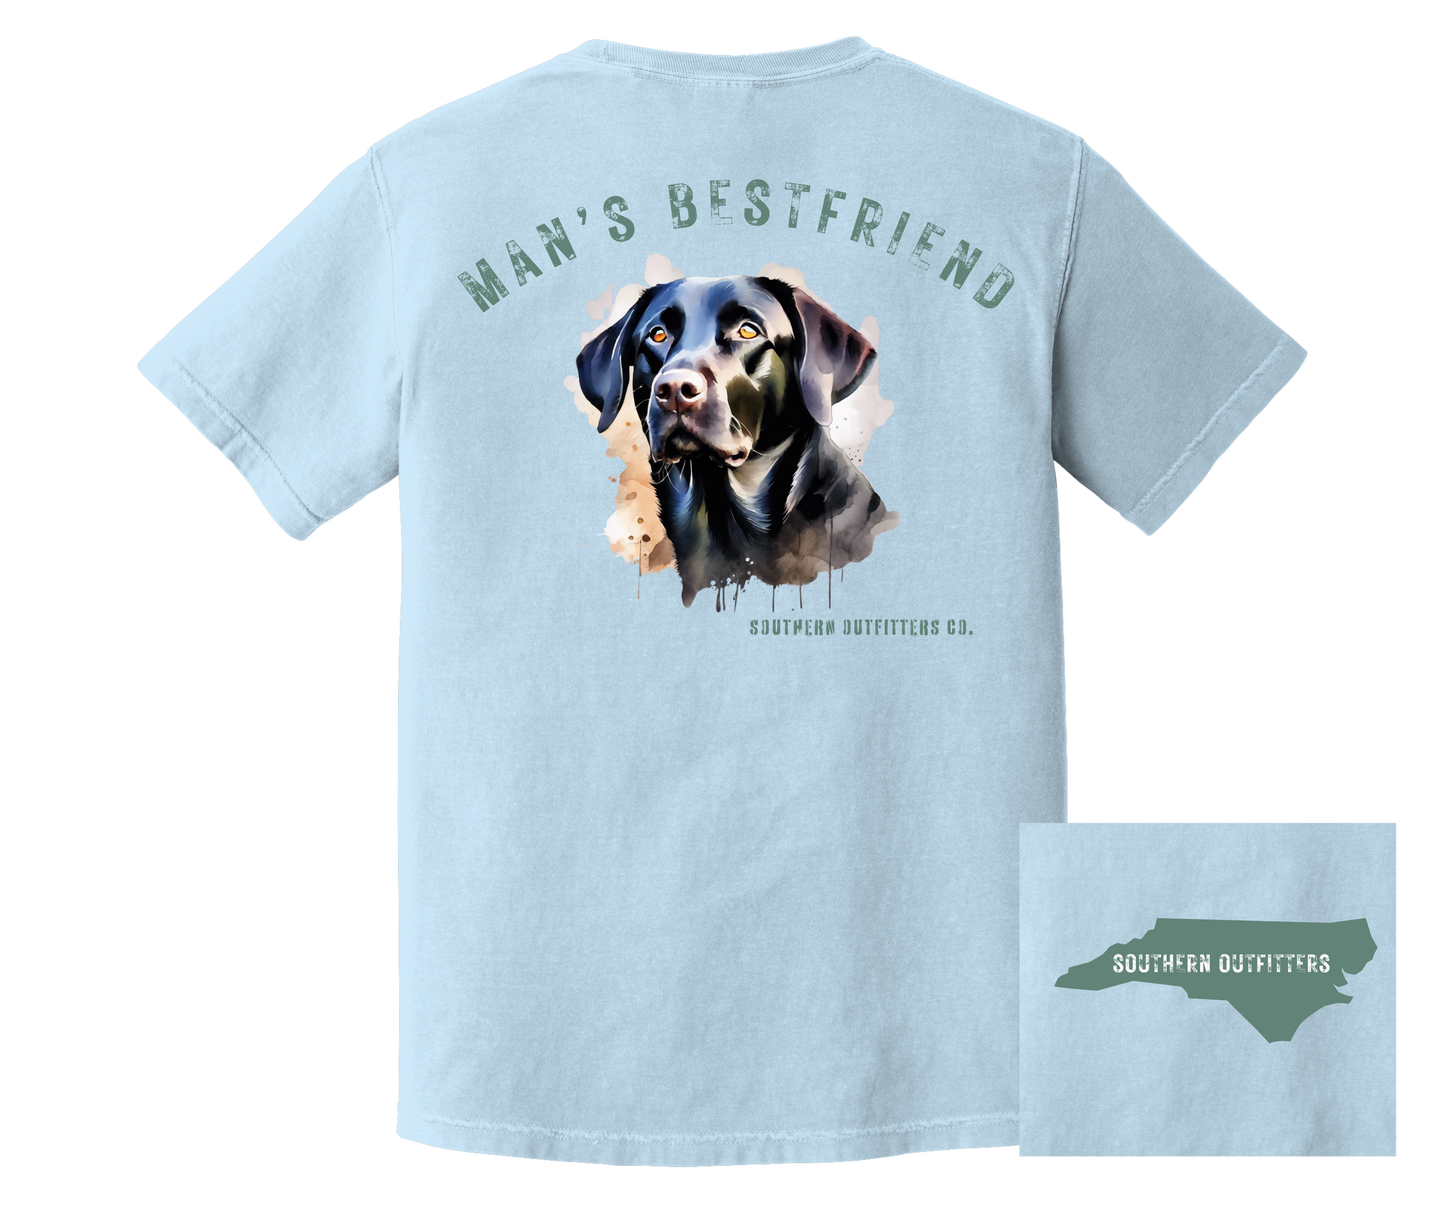 Man's Bestfriend - Southern Outfitters